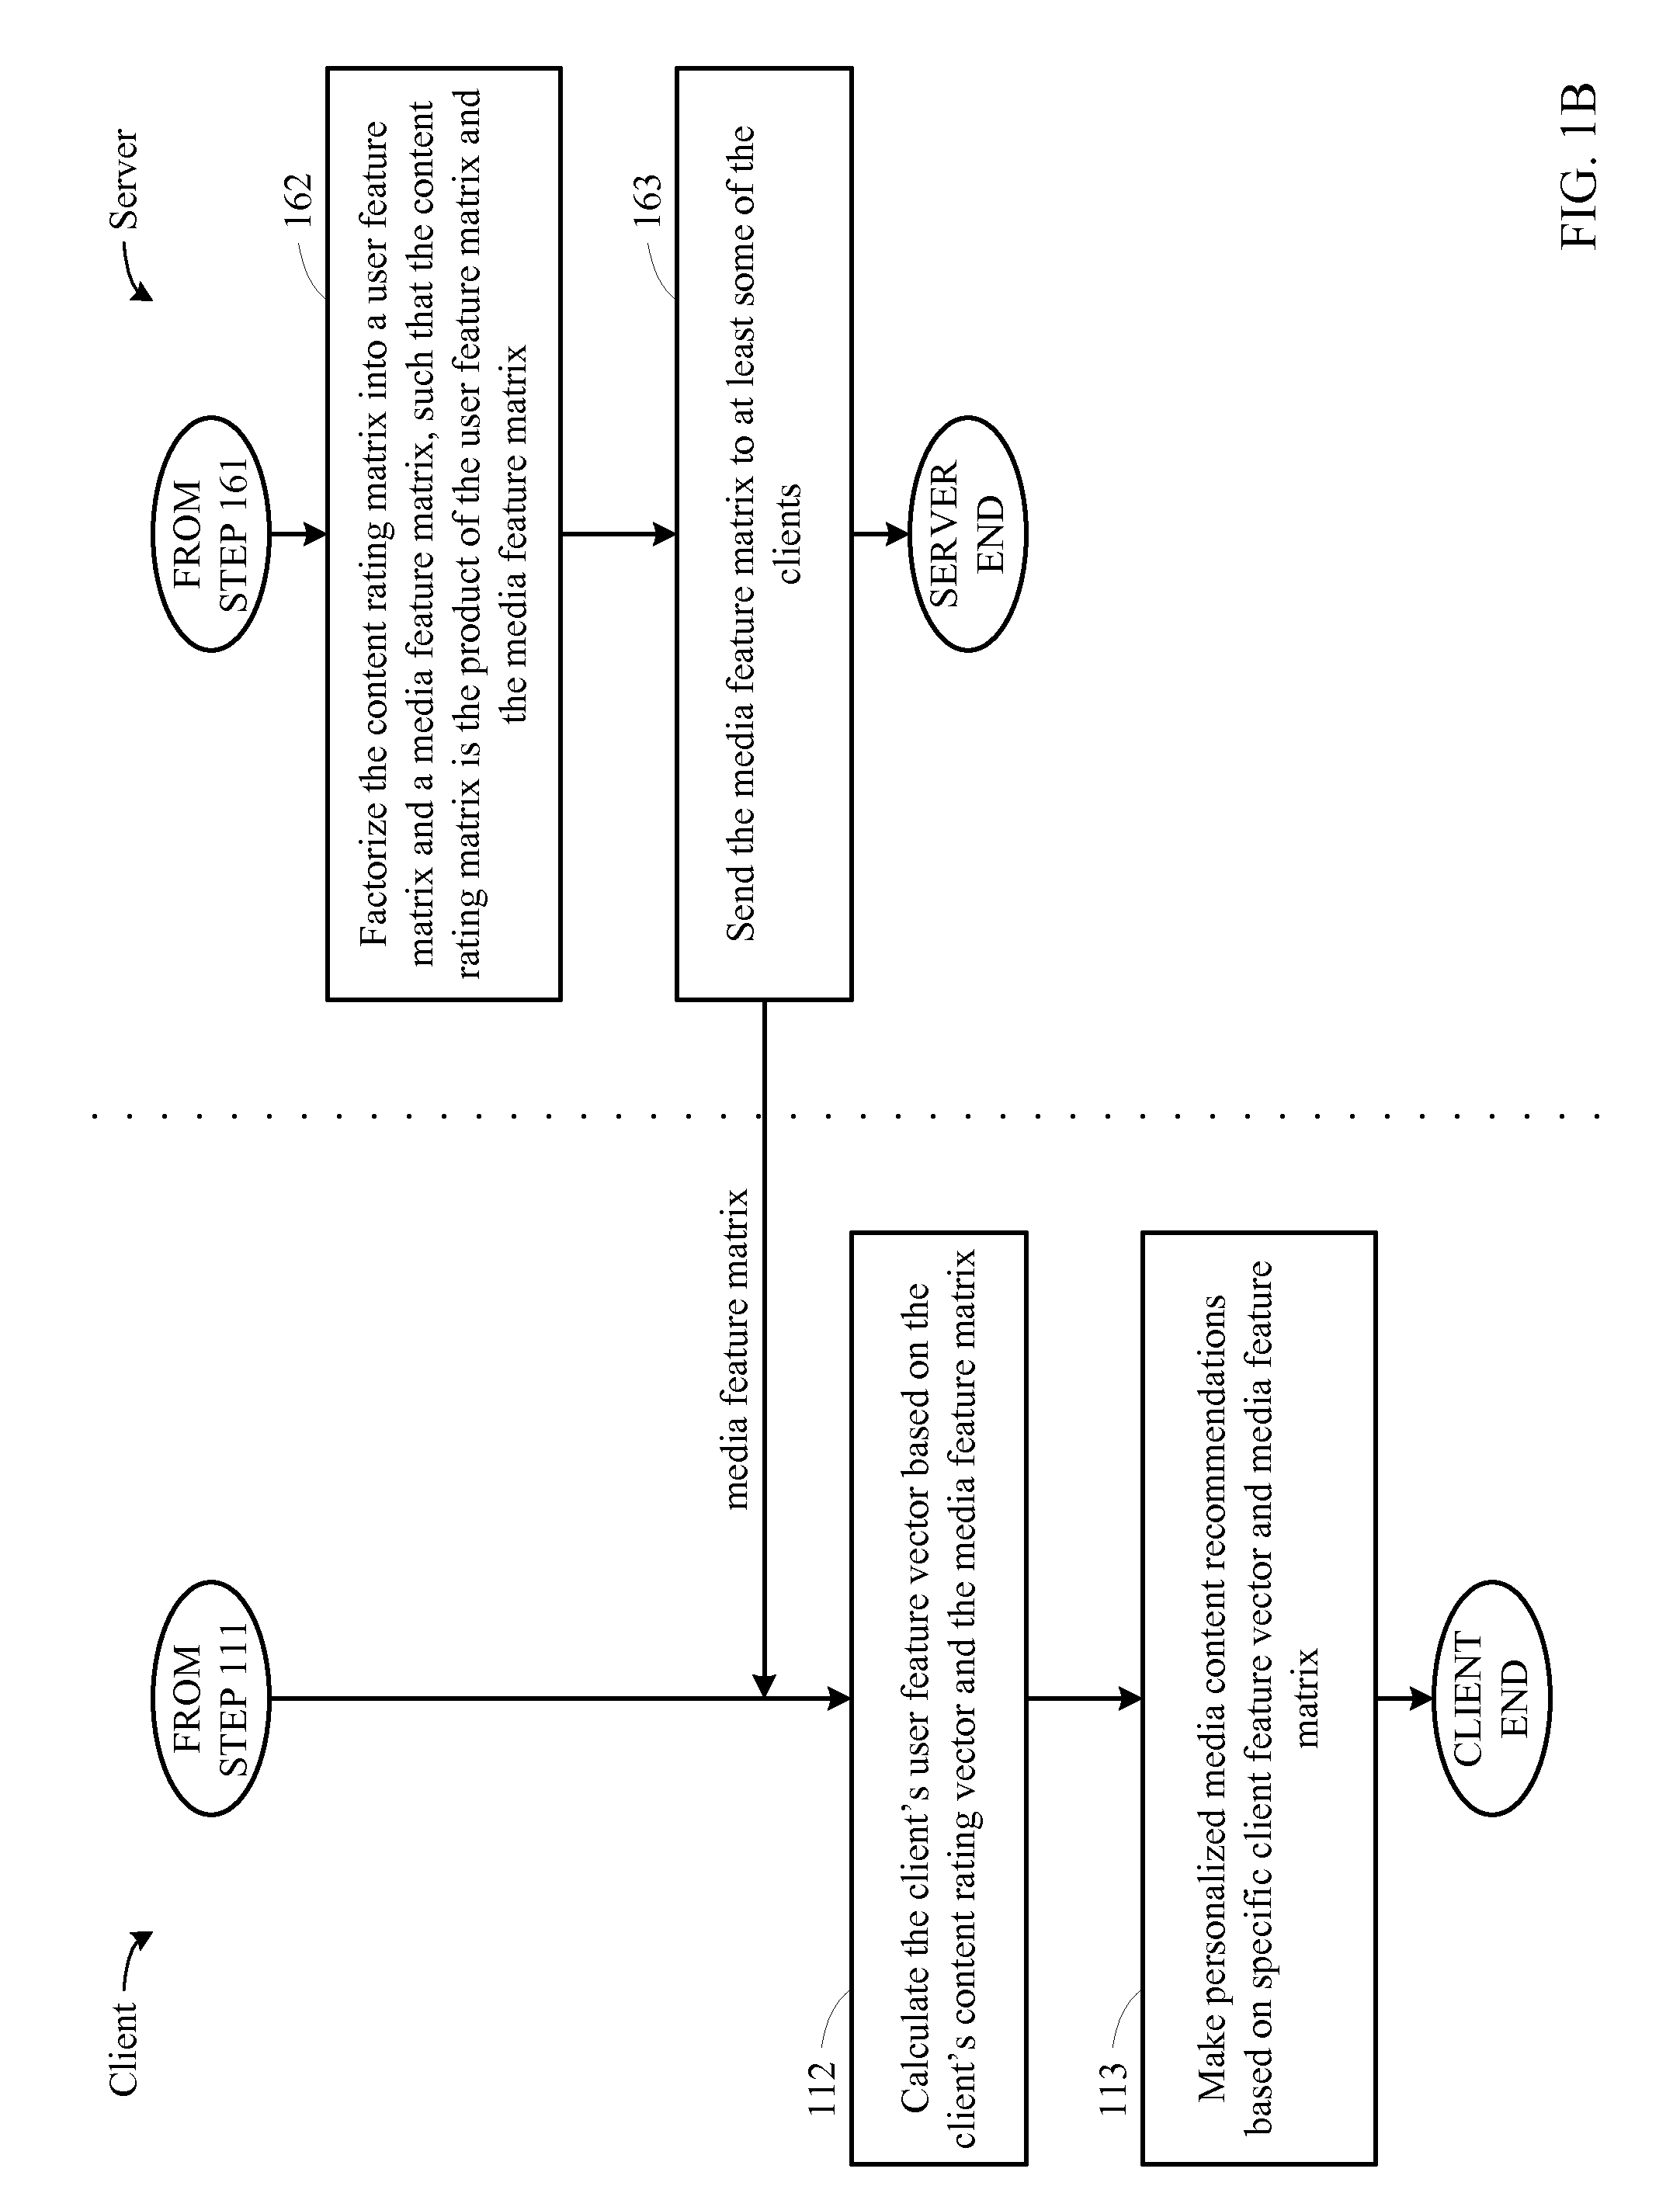 Method for anonymous collaborative filtering using matrix factorization